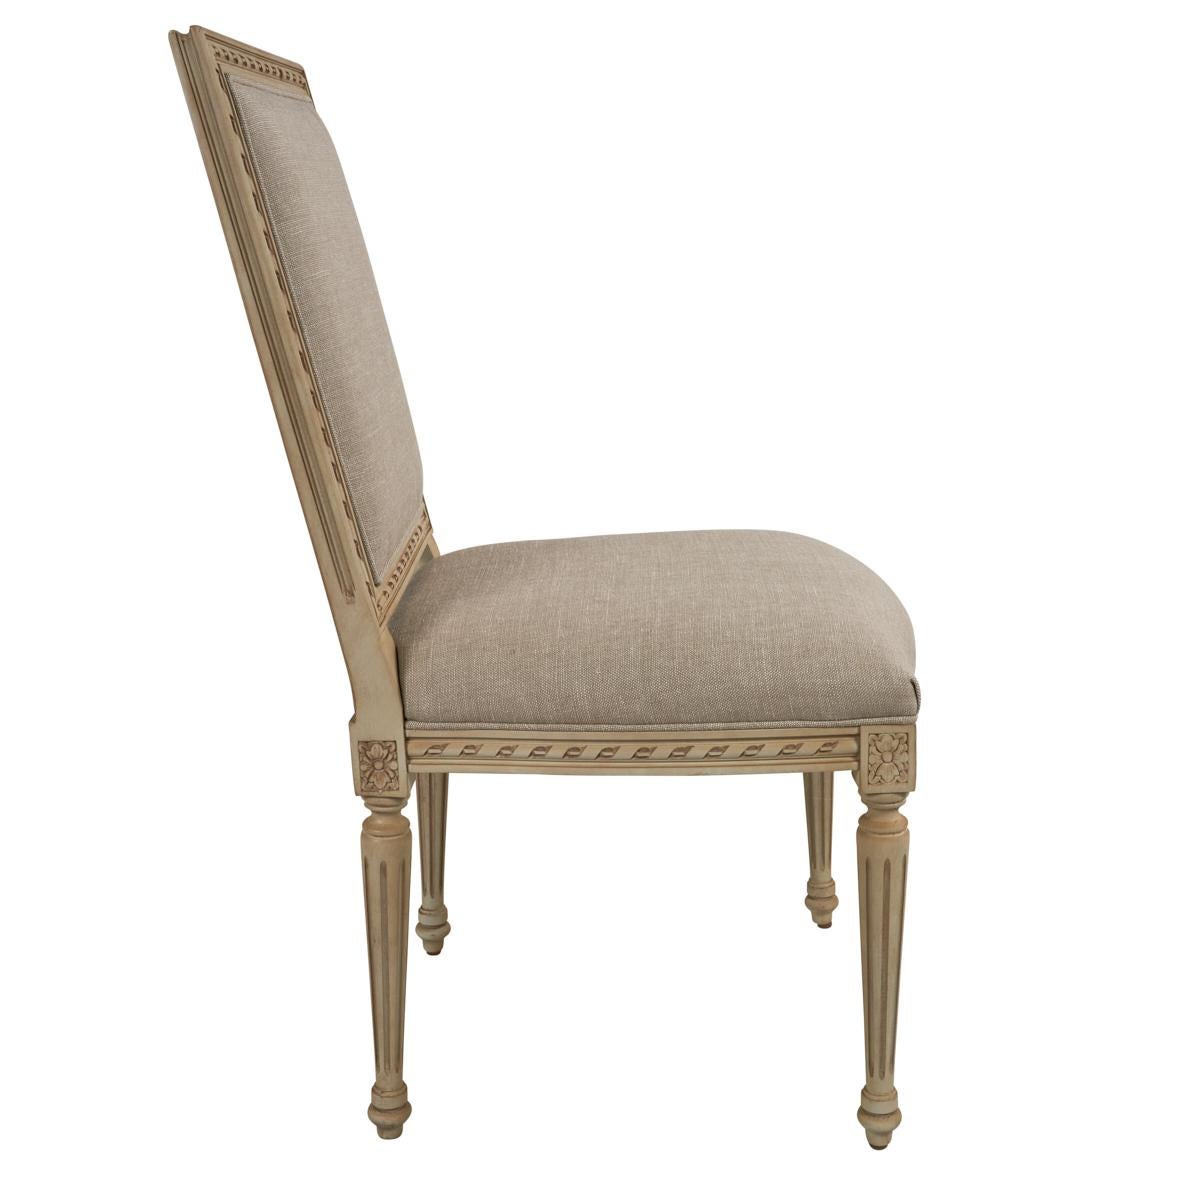 North American Louis XVI Side Chair in Piet Performance Linen